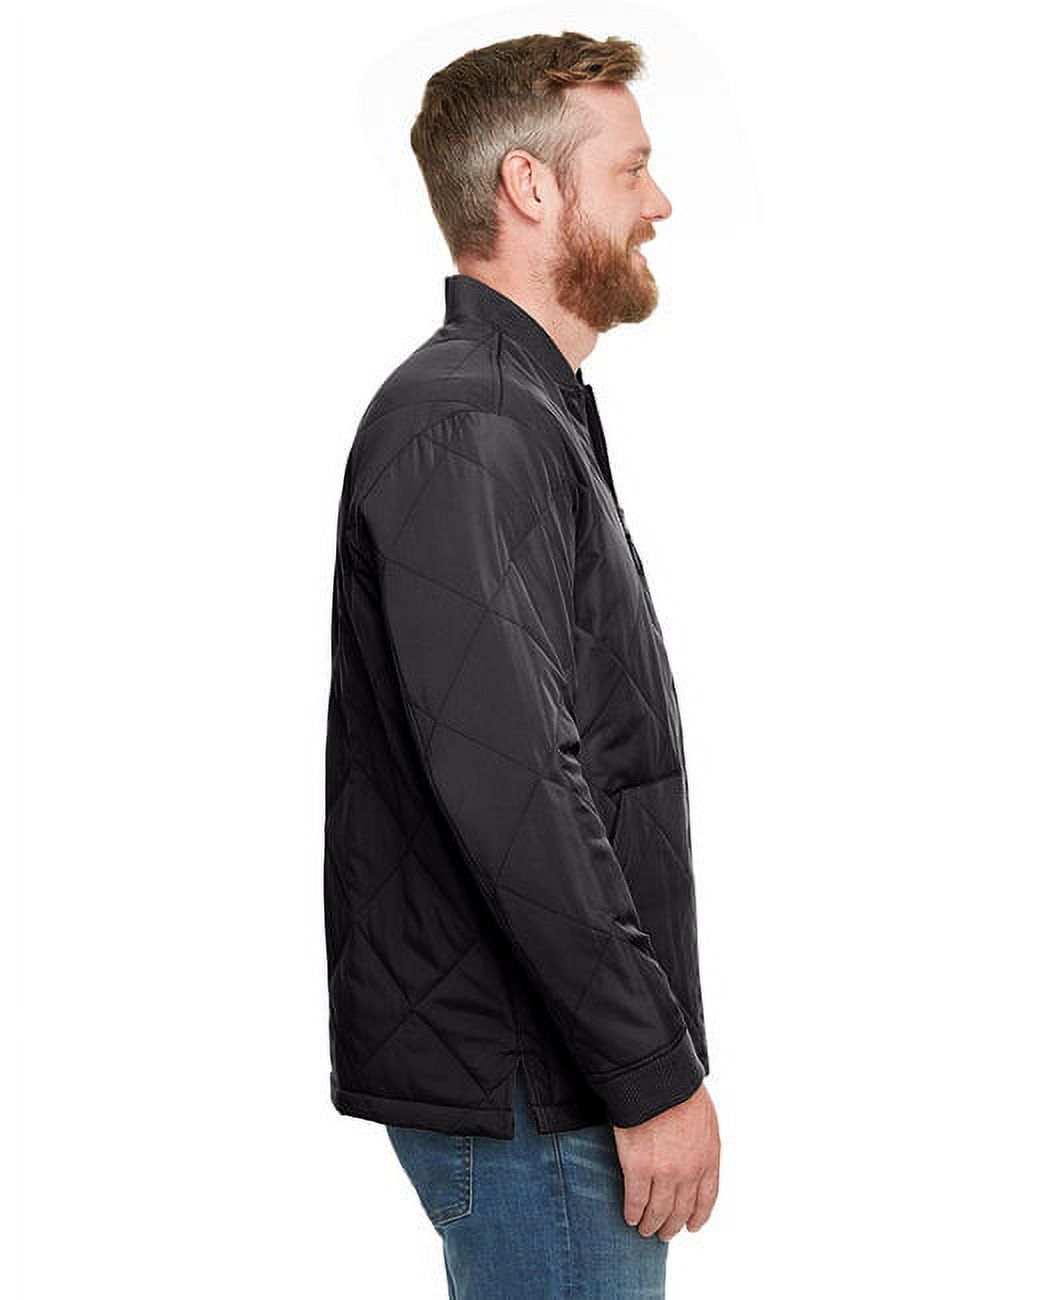 Adult Dockside Insulated Utility Jacket - DARK CHARCOAL - 5XL - image 3 of 3